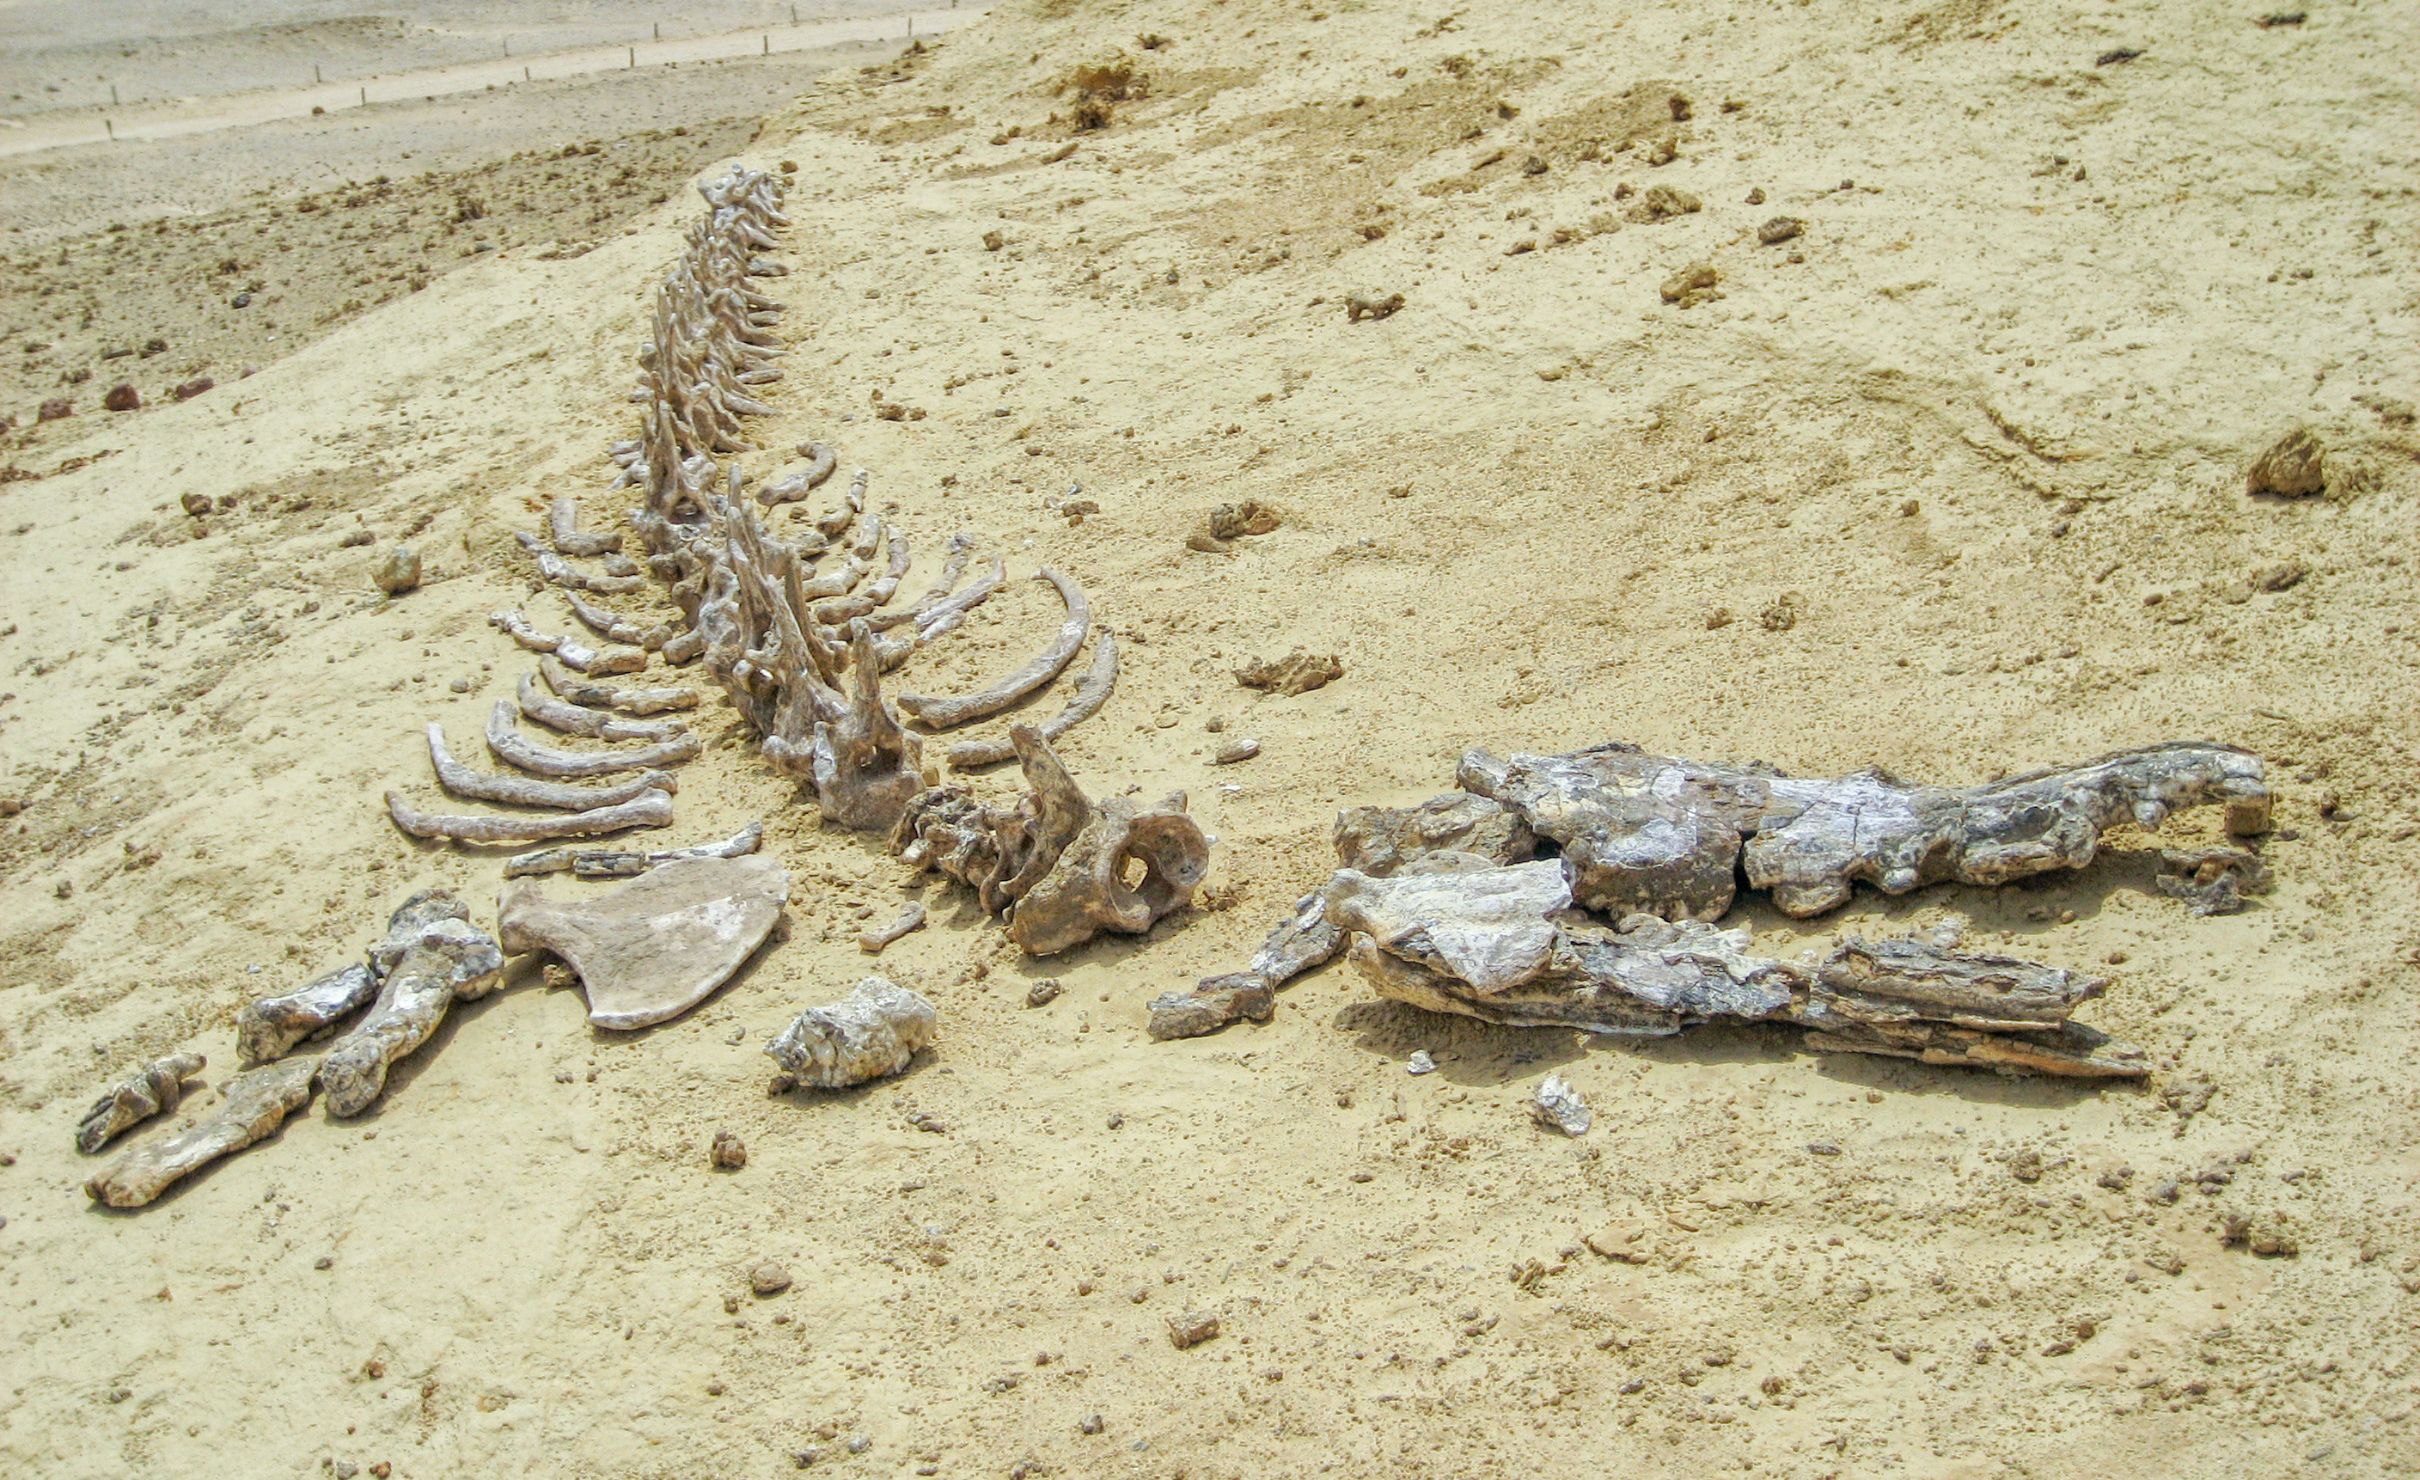 Whale skeleton in Wadi El Hitan (Valley of the Whales), paleontological site in the Faiyum Governorate of Egypt, some 150 km southwest of Cairo. It was designated a UNESCO World Heritage Sitein 2005